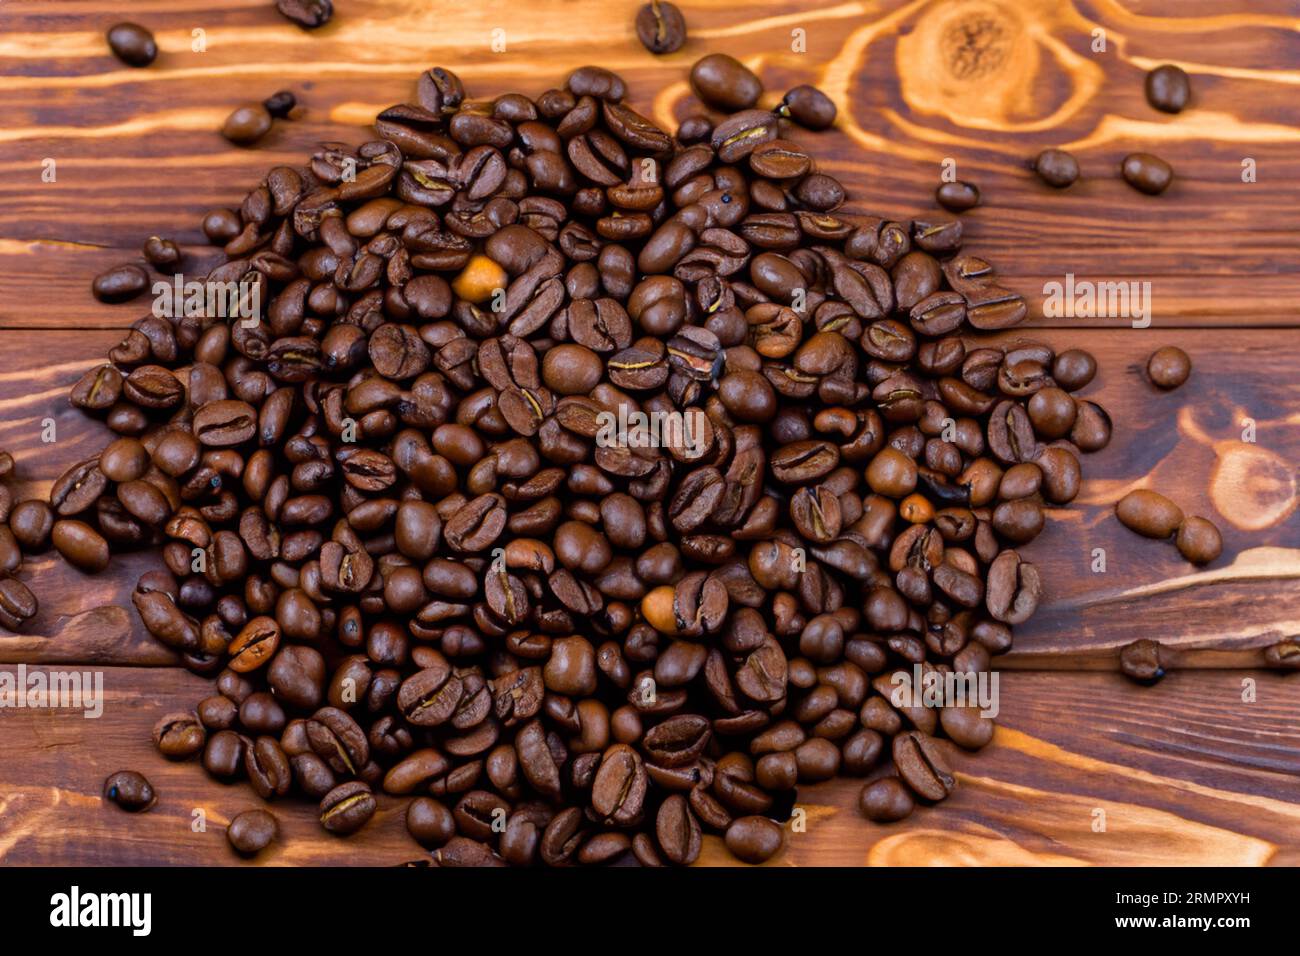 ground coffee powder with organic coffee beans on the old wooden table Stock Photo